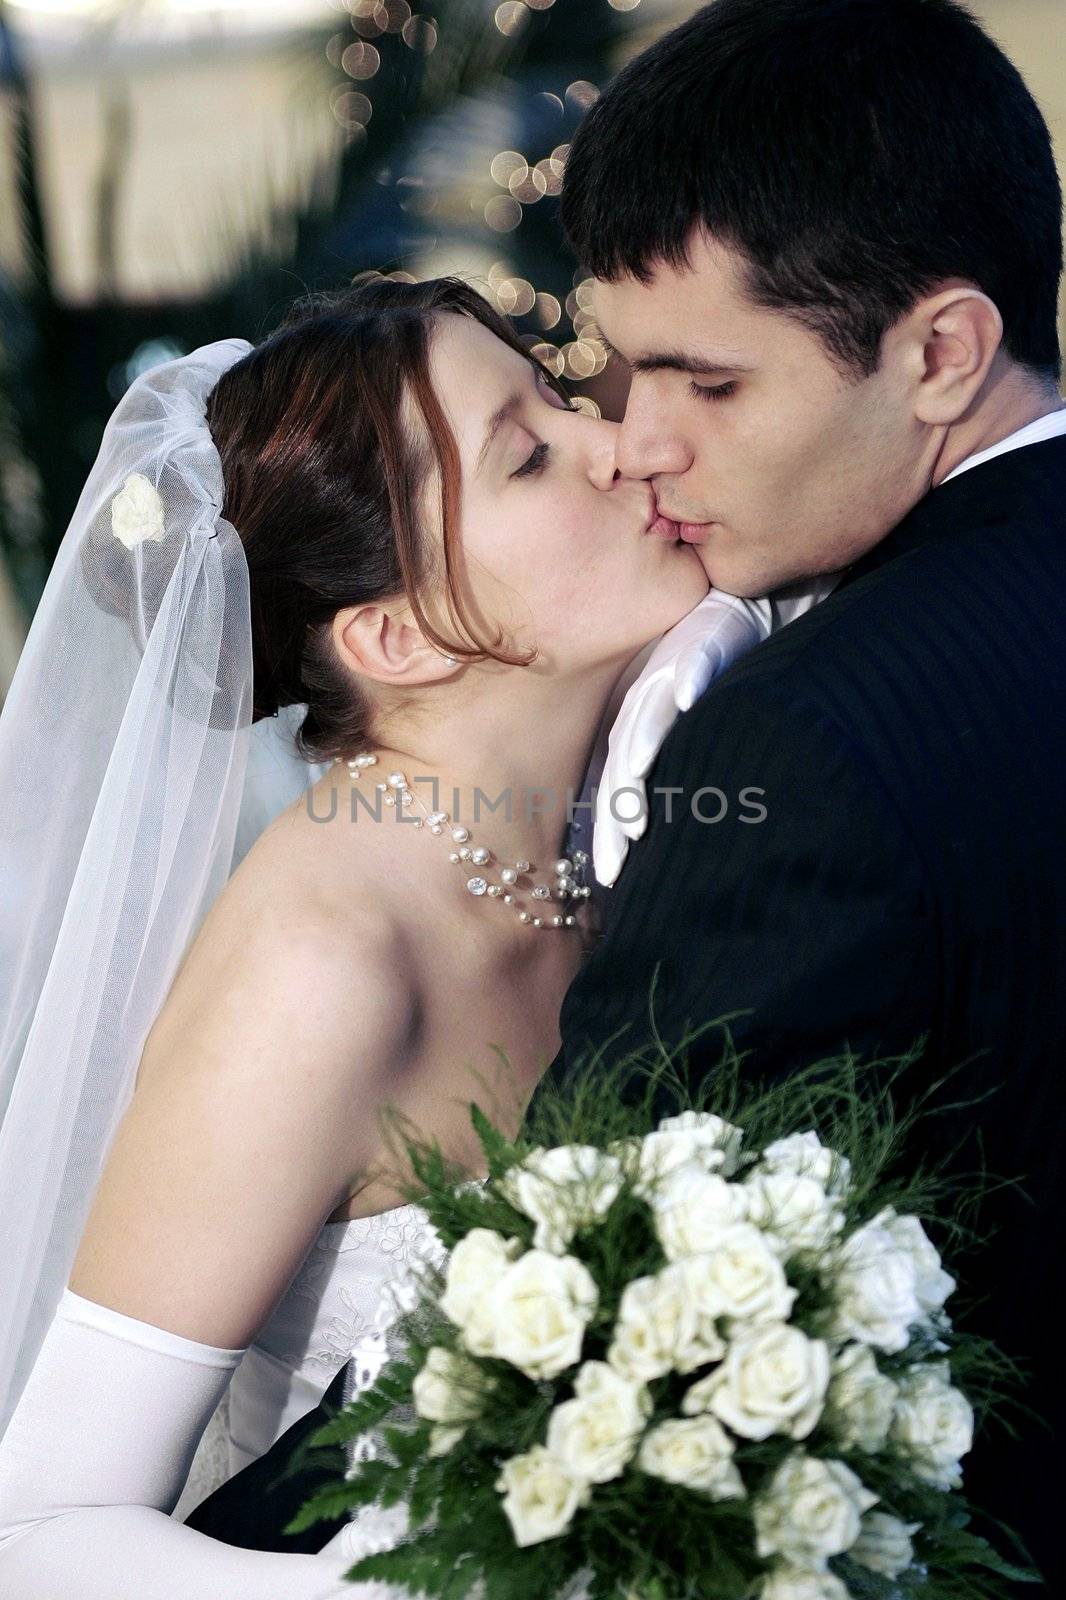 Young newlywed couple kissing pasionately, bride holding bouquet of flowers.